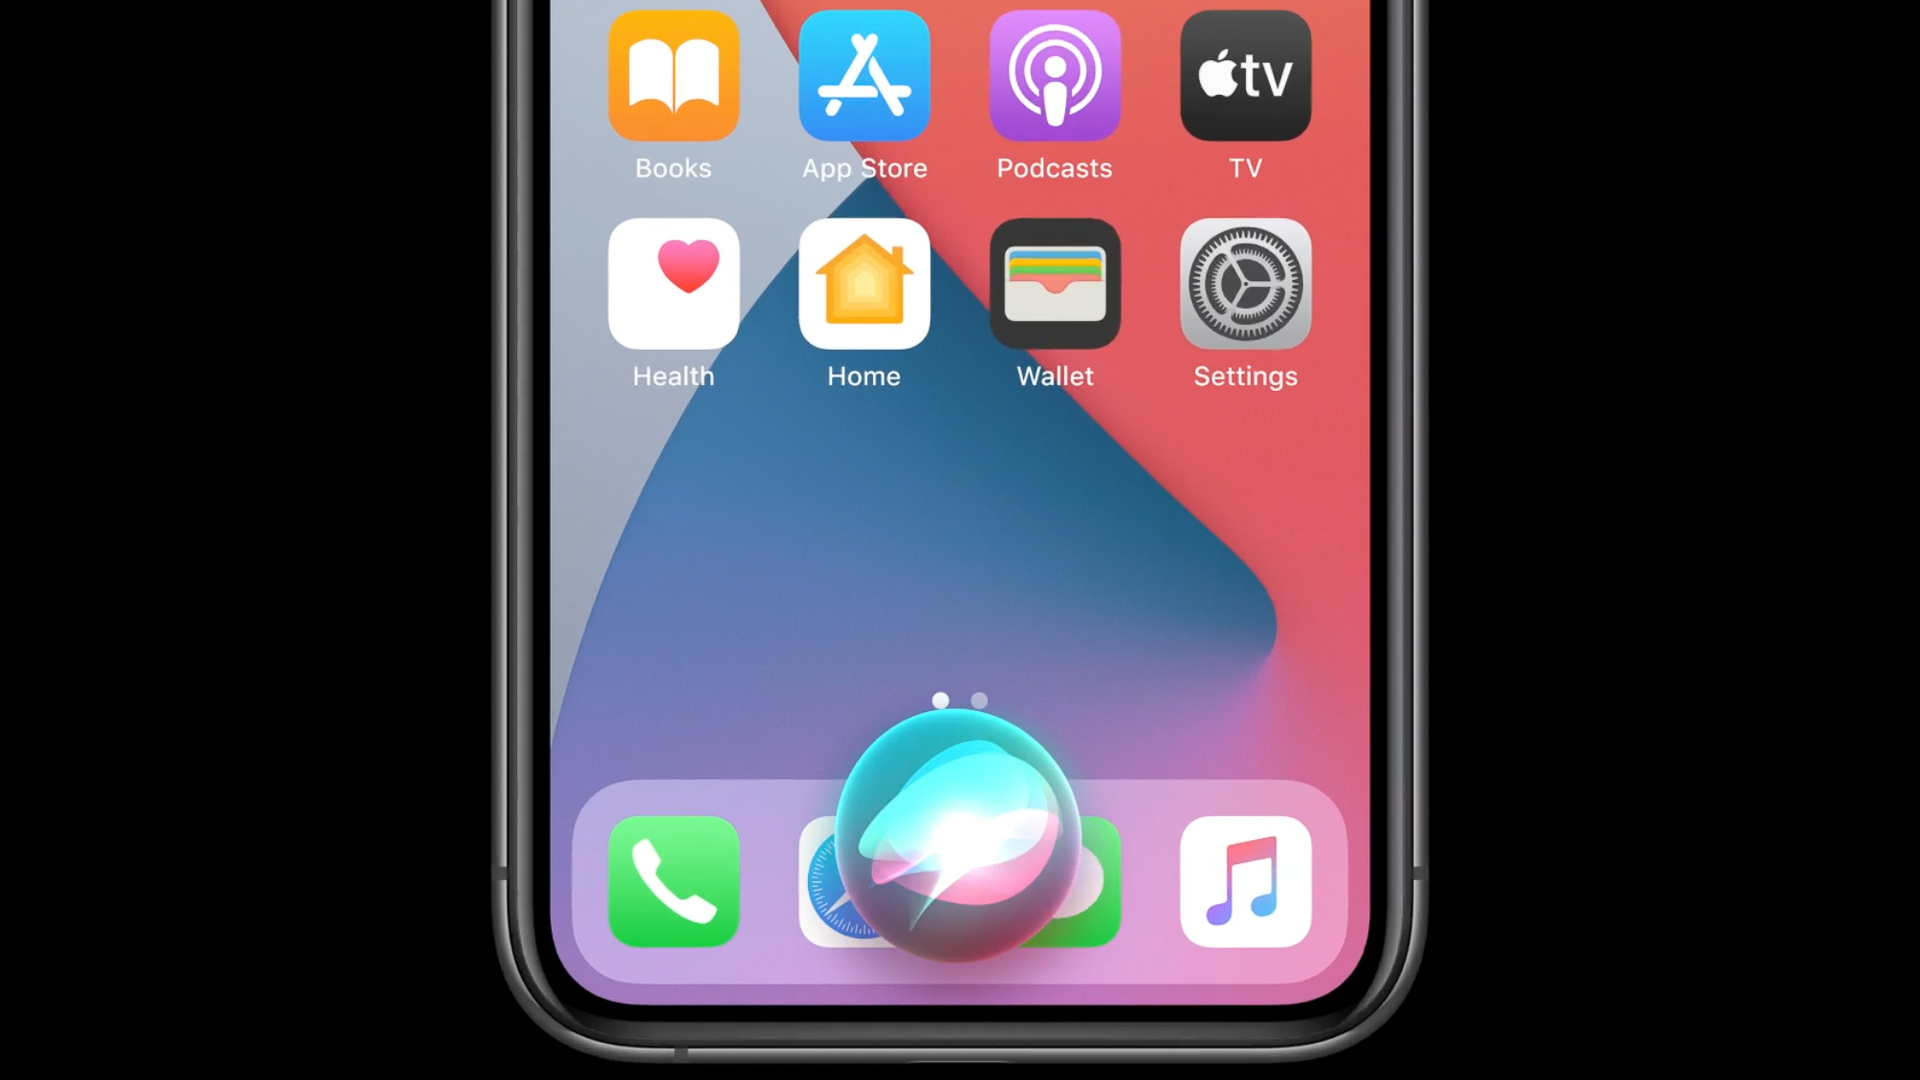 The new look for Siri as of Apple's WWDC 2020